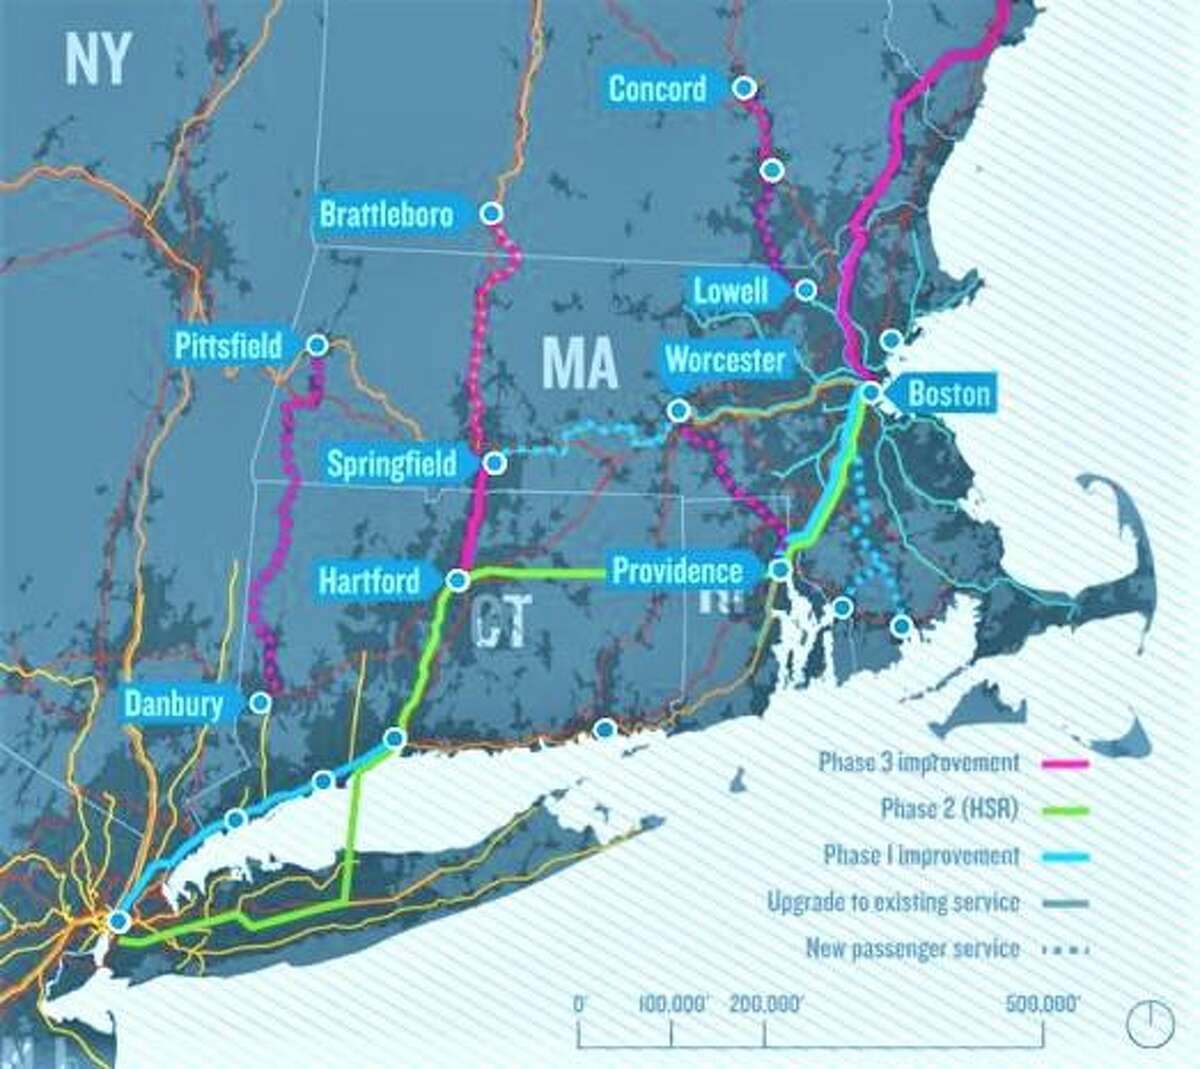 North Atlantic Rail, a privately planned high-speed rail project, would transform New England transportation. The $100 billion-plus project is vying for federal infrastructure dollars and was planned at the University of Pennsylvania with Connecticut officials.